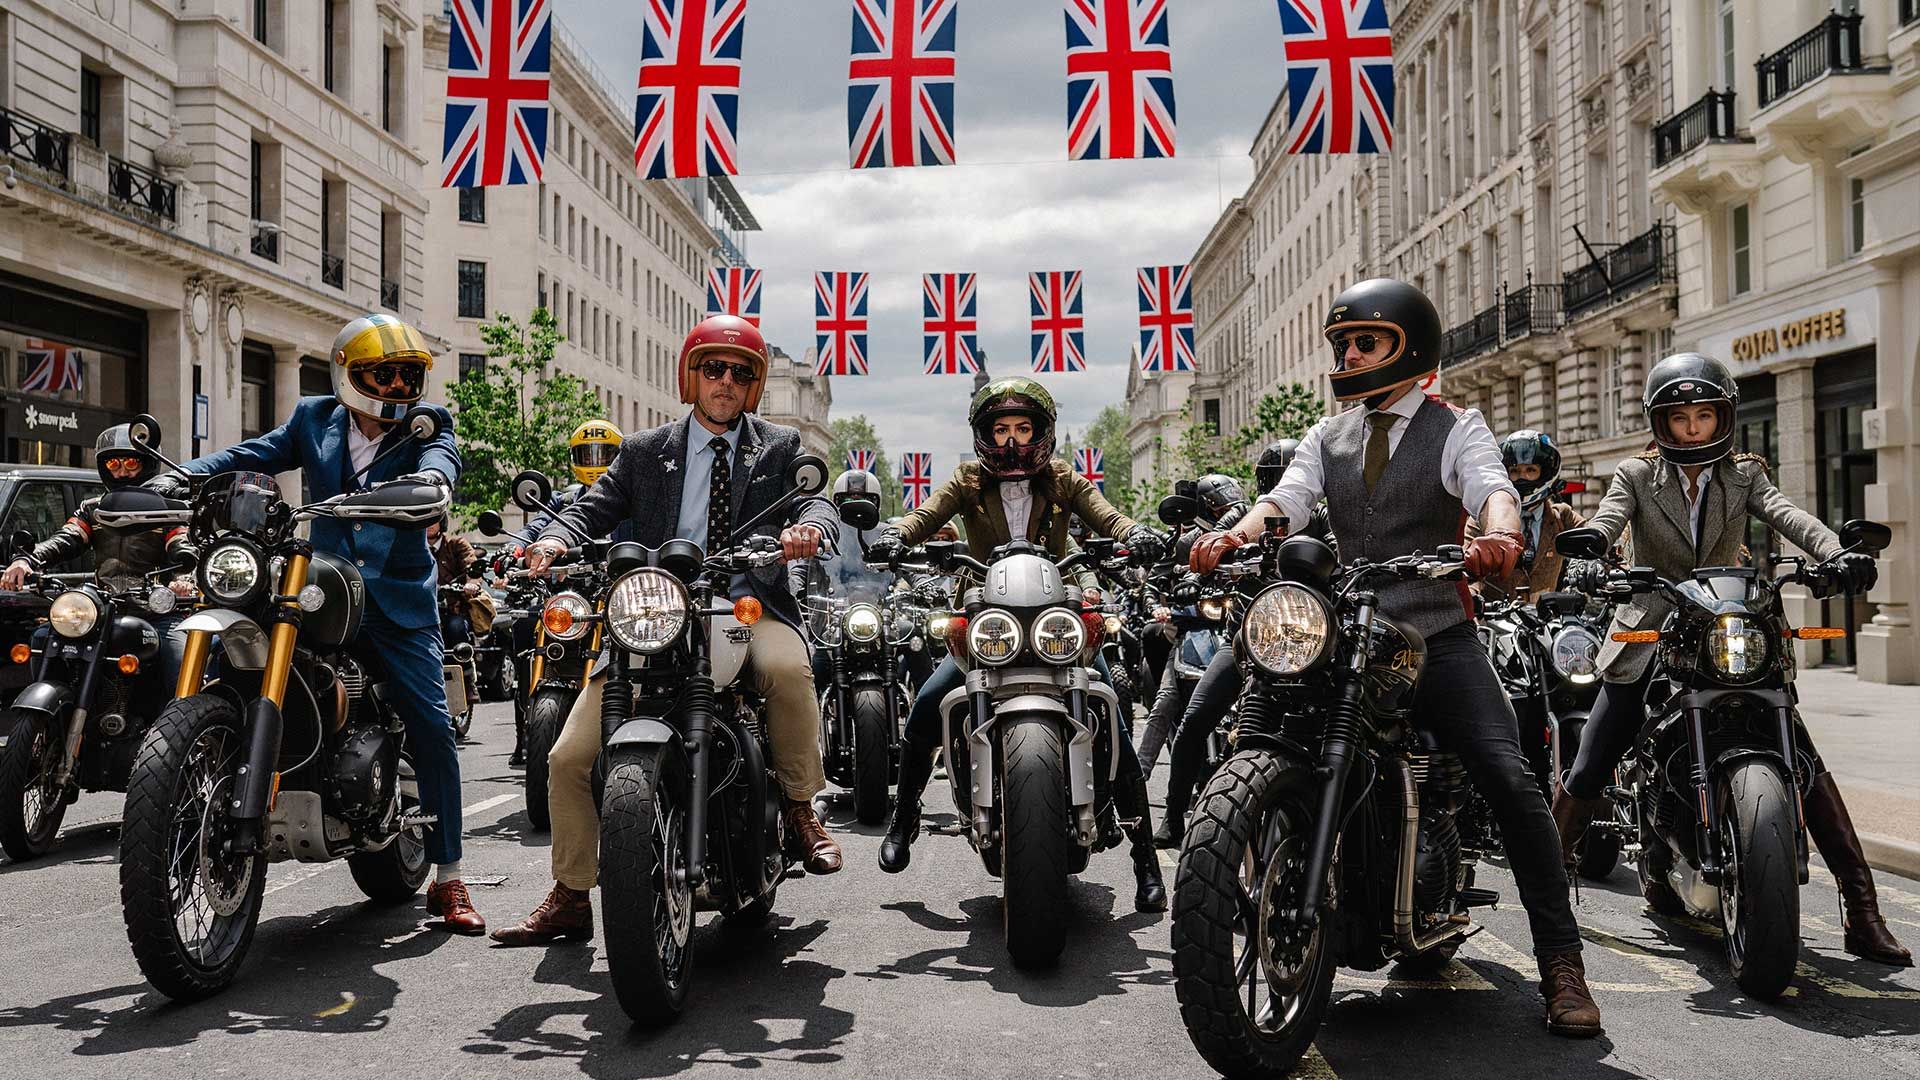 Dapper motorcyclists, assembled for a charity ride on a lively urban street. Union Jack banners are visible behind them.